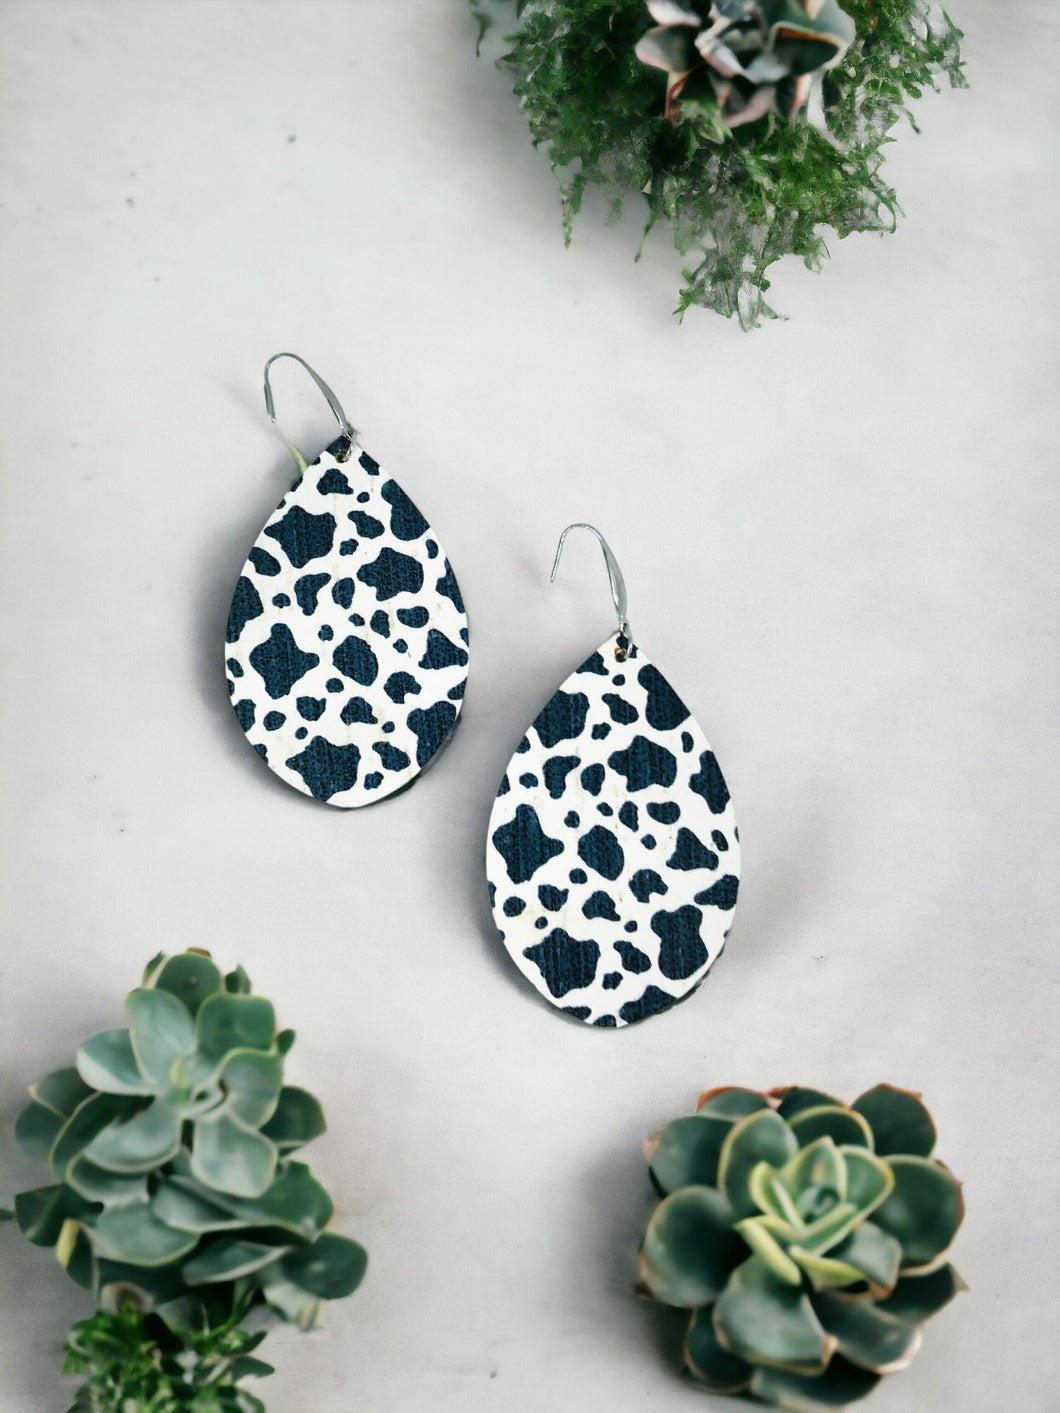 Spotted Cow Cork on Leather Earrings - E19-2827